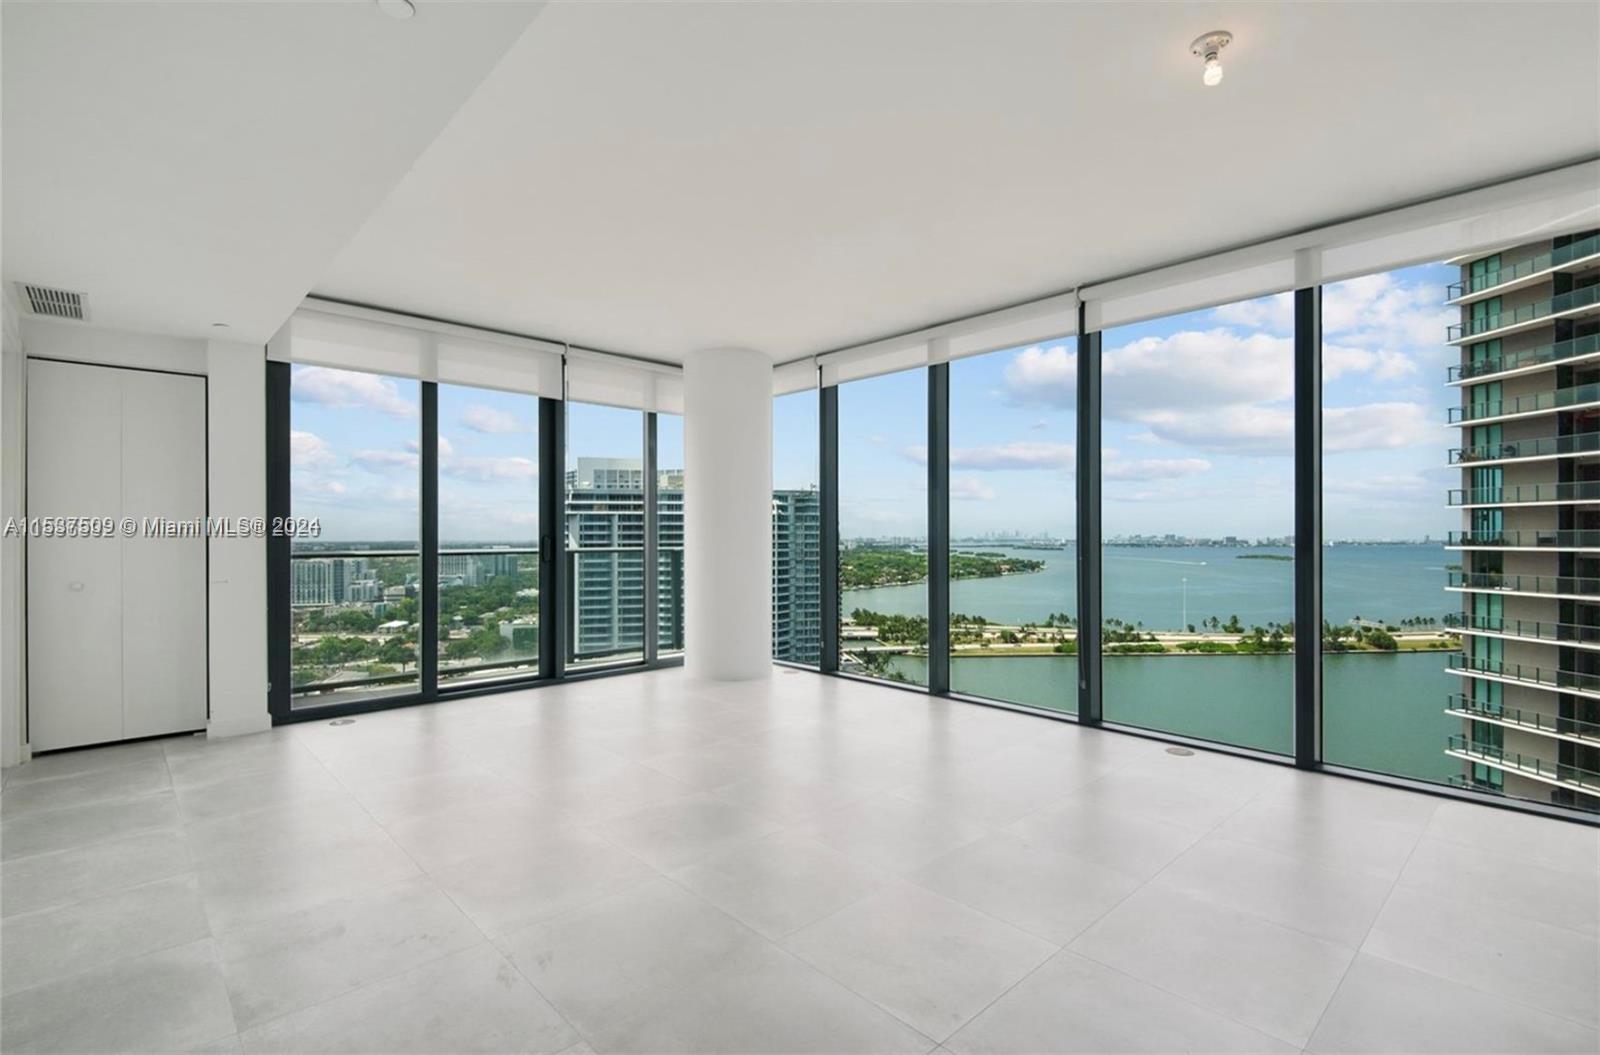 Enjoy this oversized 1 BR + 1 1/2 BA WITH spectacular bay views at the Paraiso Bay in Edgewater.  LARGE LIVING AREA WITH FLOOR TO CEILING WINDOWS ALL AROUND * ENJOY ANY AMENITY YOU CAN THINK OF ... 3-ACRE RESORT DECK LOADED WITH A ZERO-ENTRY HEATED SWIMMING POOL, OUTDOOR SPA, POOLSIDE CABANAS, SUMMER KITCHEN, JOGGING CIRCUIT, GARDENS & LANDSCAPED SUN TERRACE. IN ADDITION, CLUBROOM WITH BILLIARDS, CATERING KITCHEN AND MULTIMEDIA FACILITIES, FITNESS CENTER WITH CARDIO THEATRE OVERLOOKING THE POOL DECK RESORT AREA, HEALTH SPA WITH STEAM AND SAUNA FACILITIES, PRIVATE SCREENING ROOM WITH THEATER-STYLE SEATING, WINE ROOM, CIGAR LOUNGE, TEEN’S GAME ROOM, CHILDREN’S PLAYROOM, 2 LIGHTED TENNIS COURTS & MULTIPURPOSE COURT, GOLF SIMULATOR AND BOWLING!